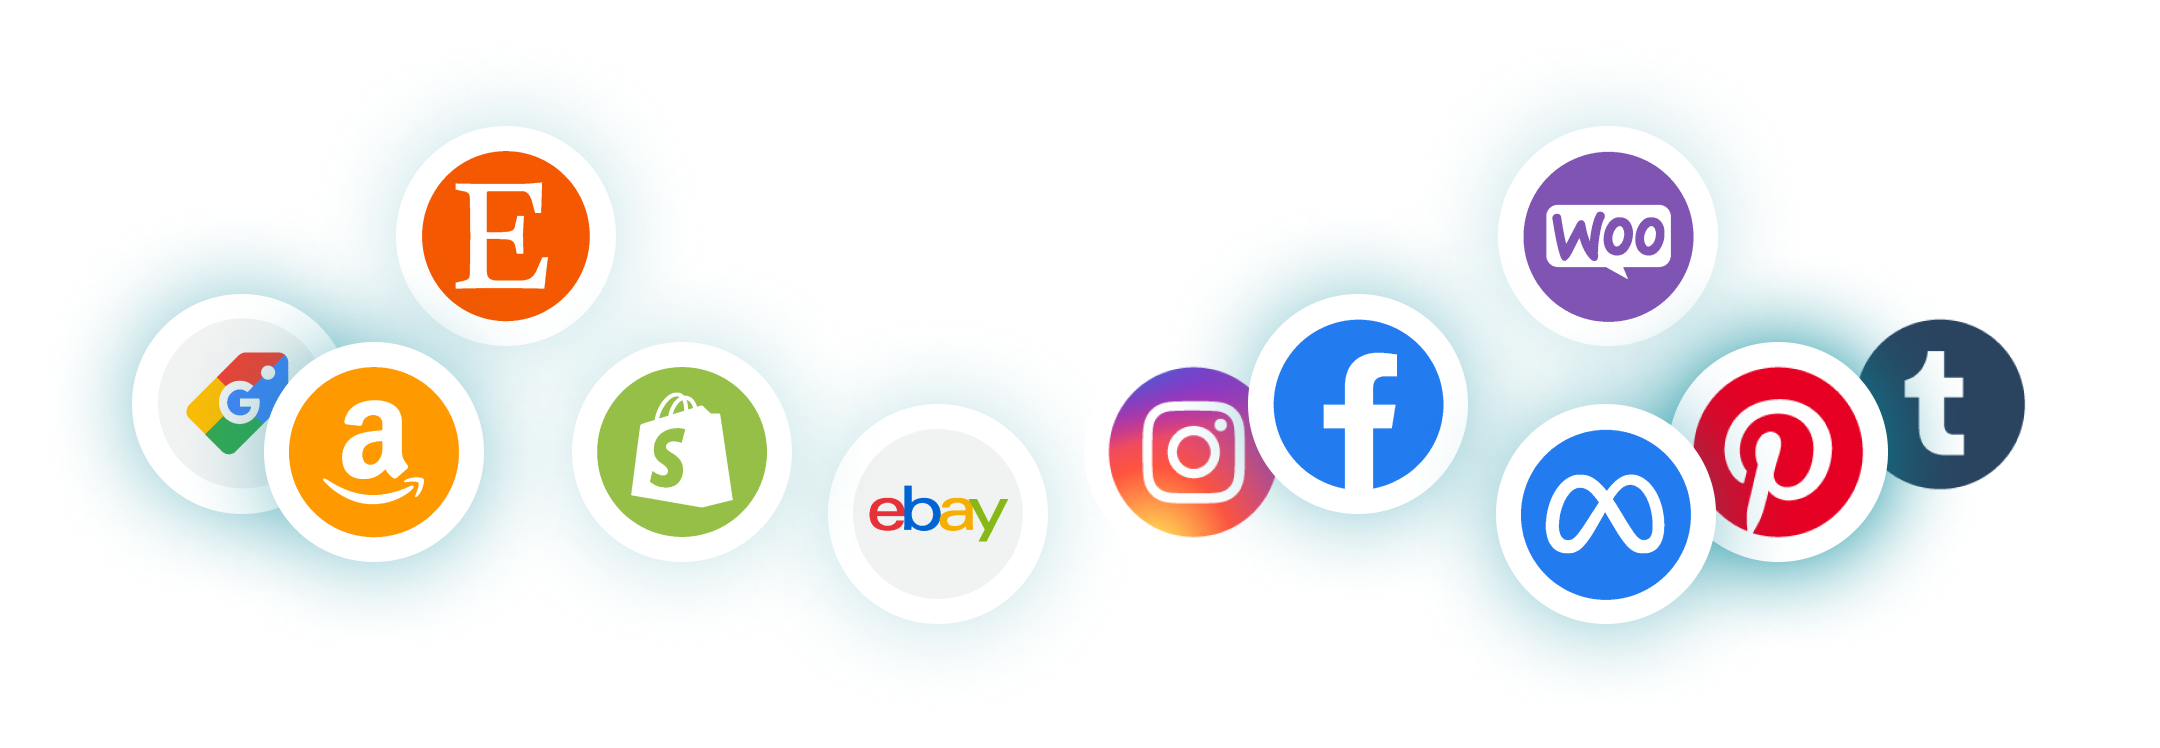 Bulk import products to eBay and multiple channels: Etsy, Shopify, Amazon, & more